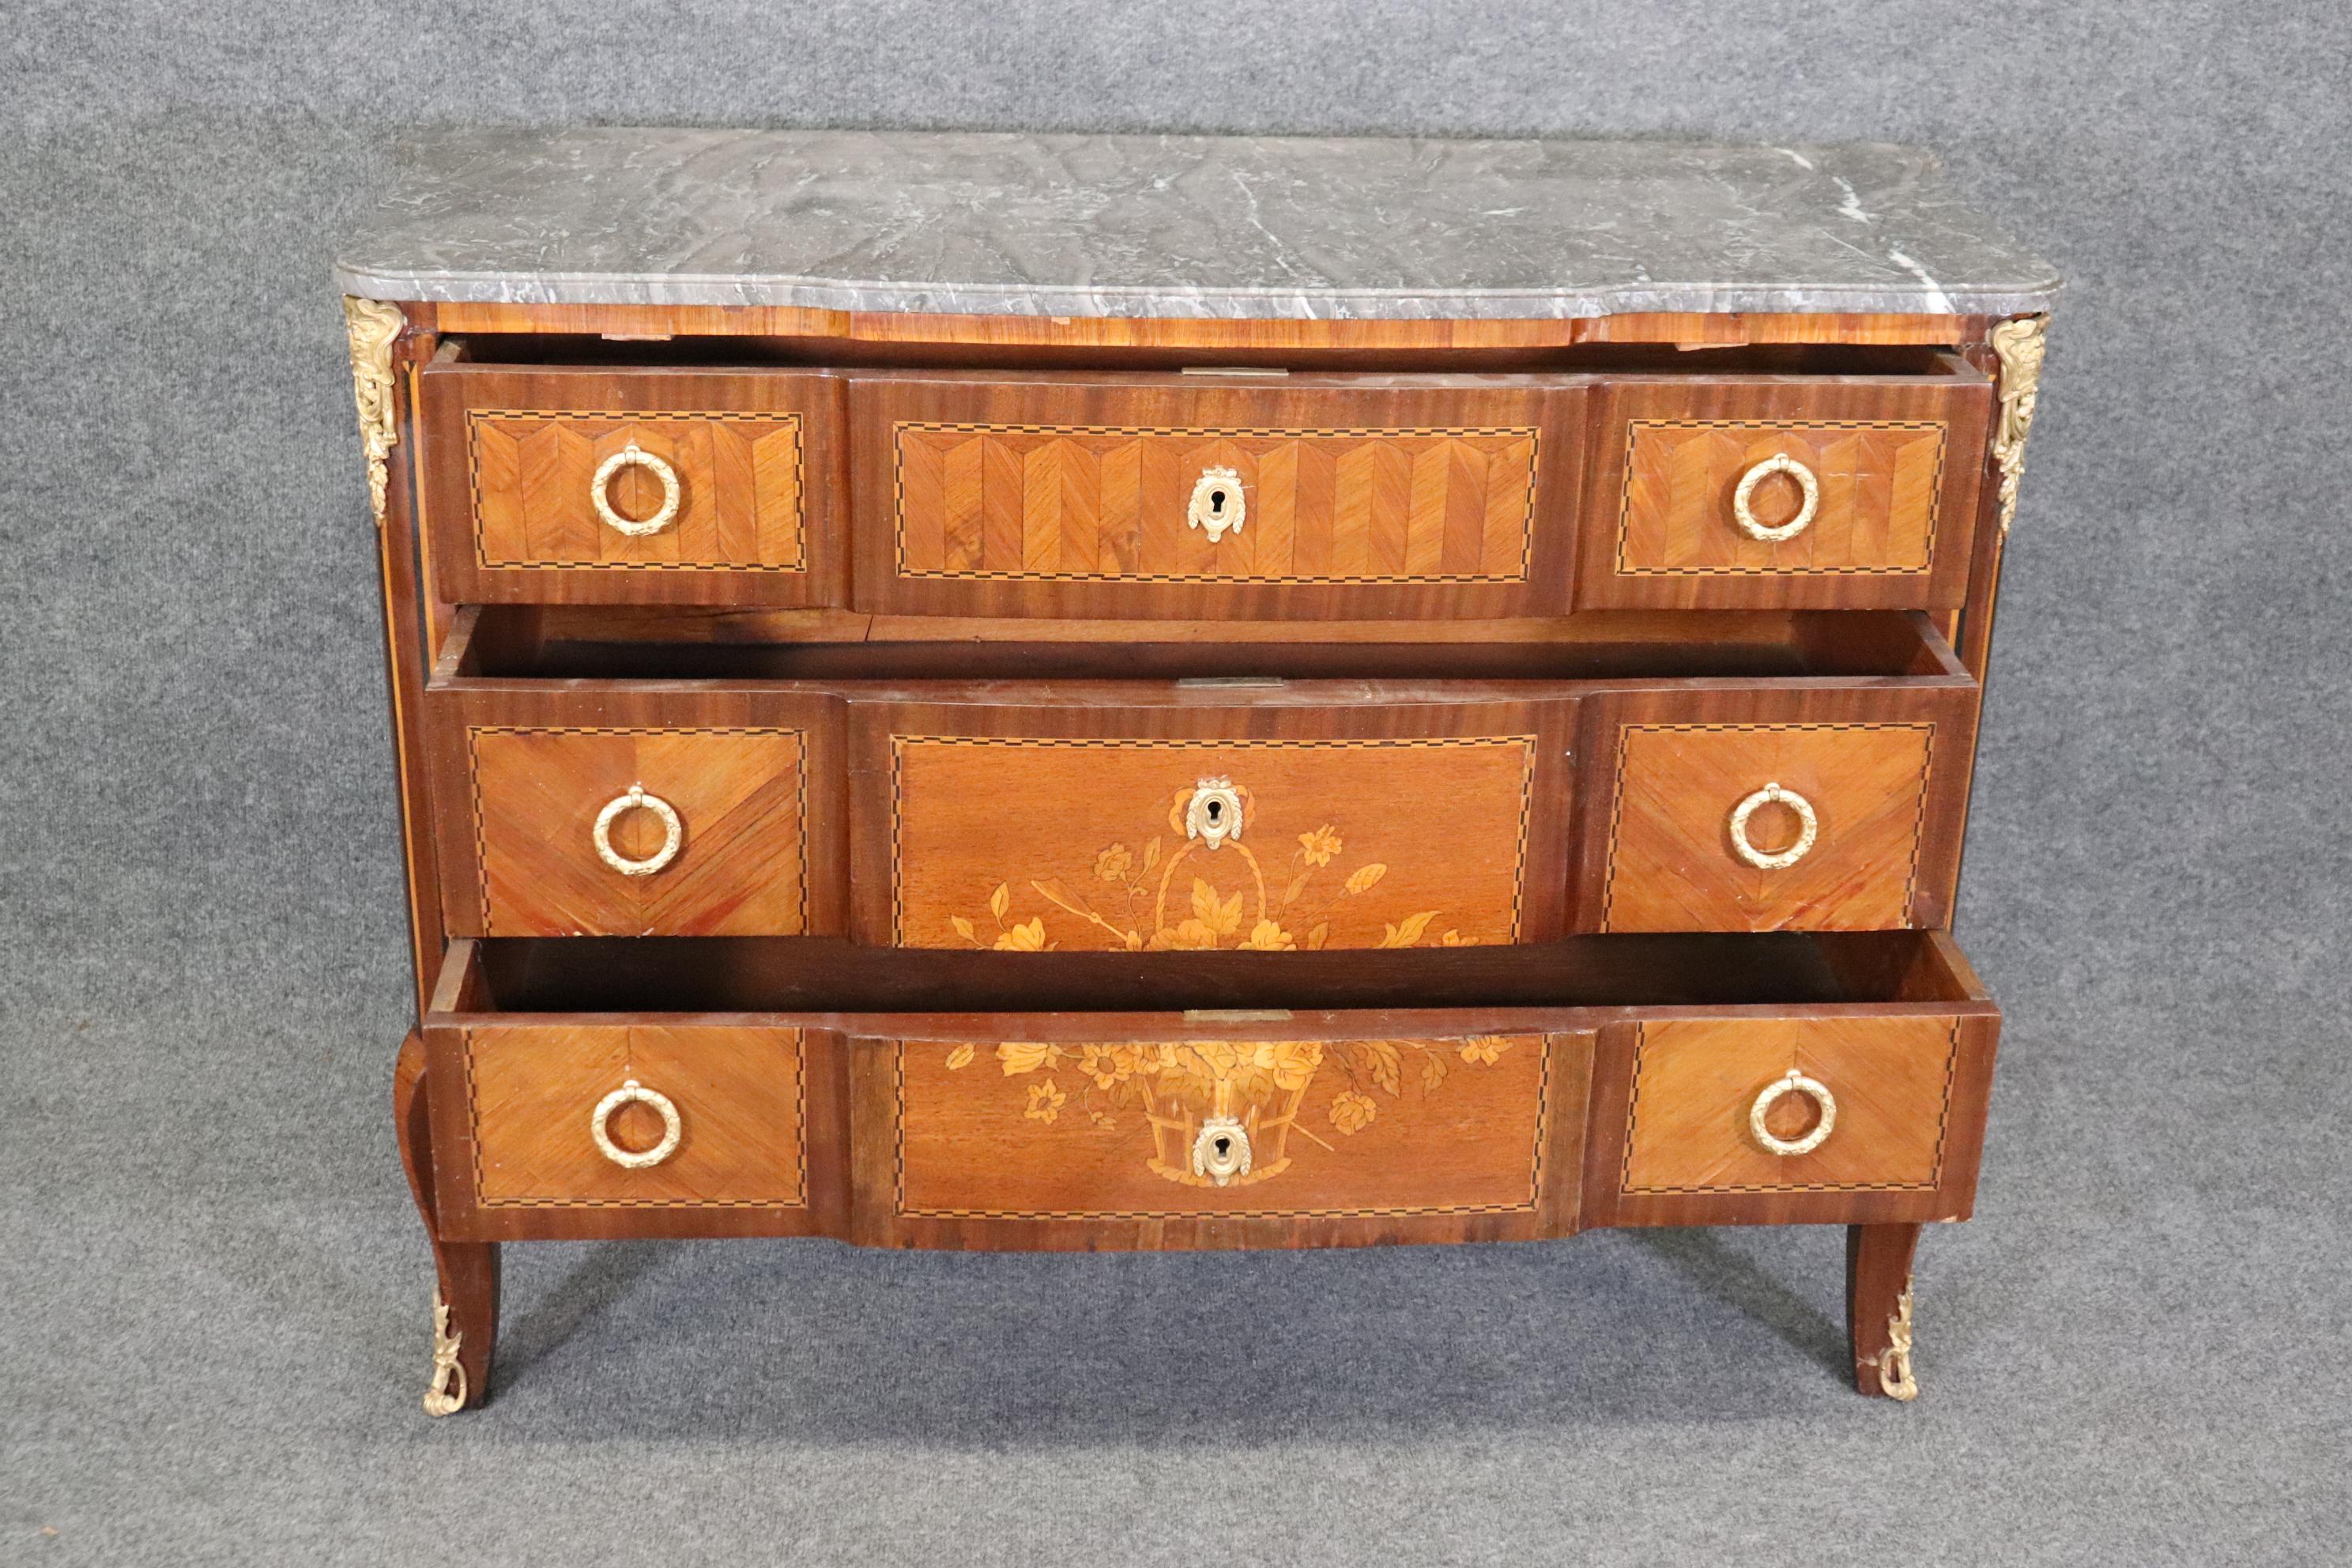 Antique 19th Century French Louis XV Style Inlaid Marble Top Commode For Sale 1